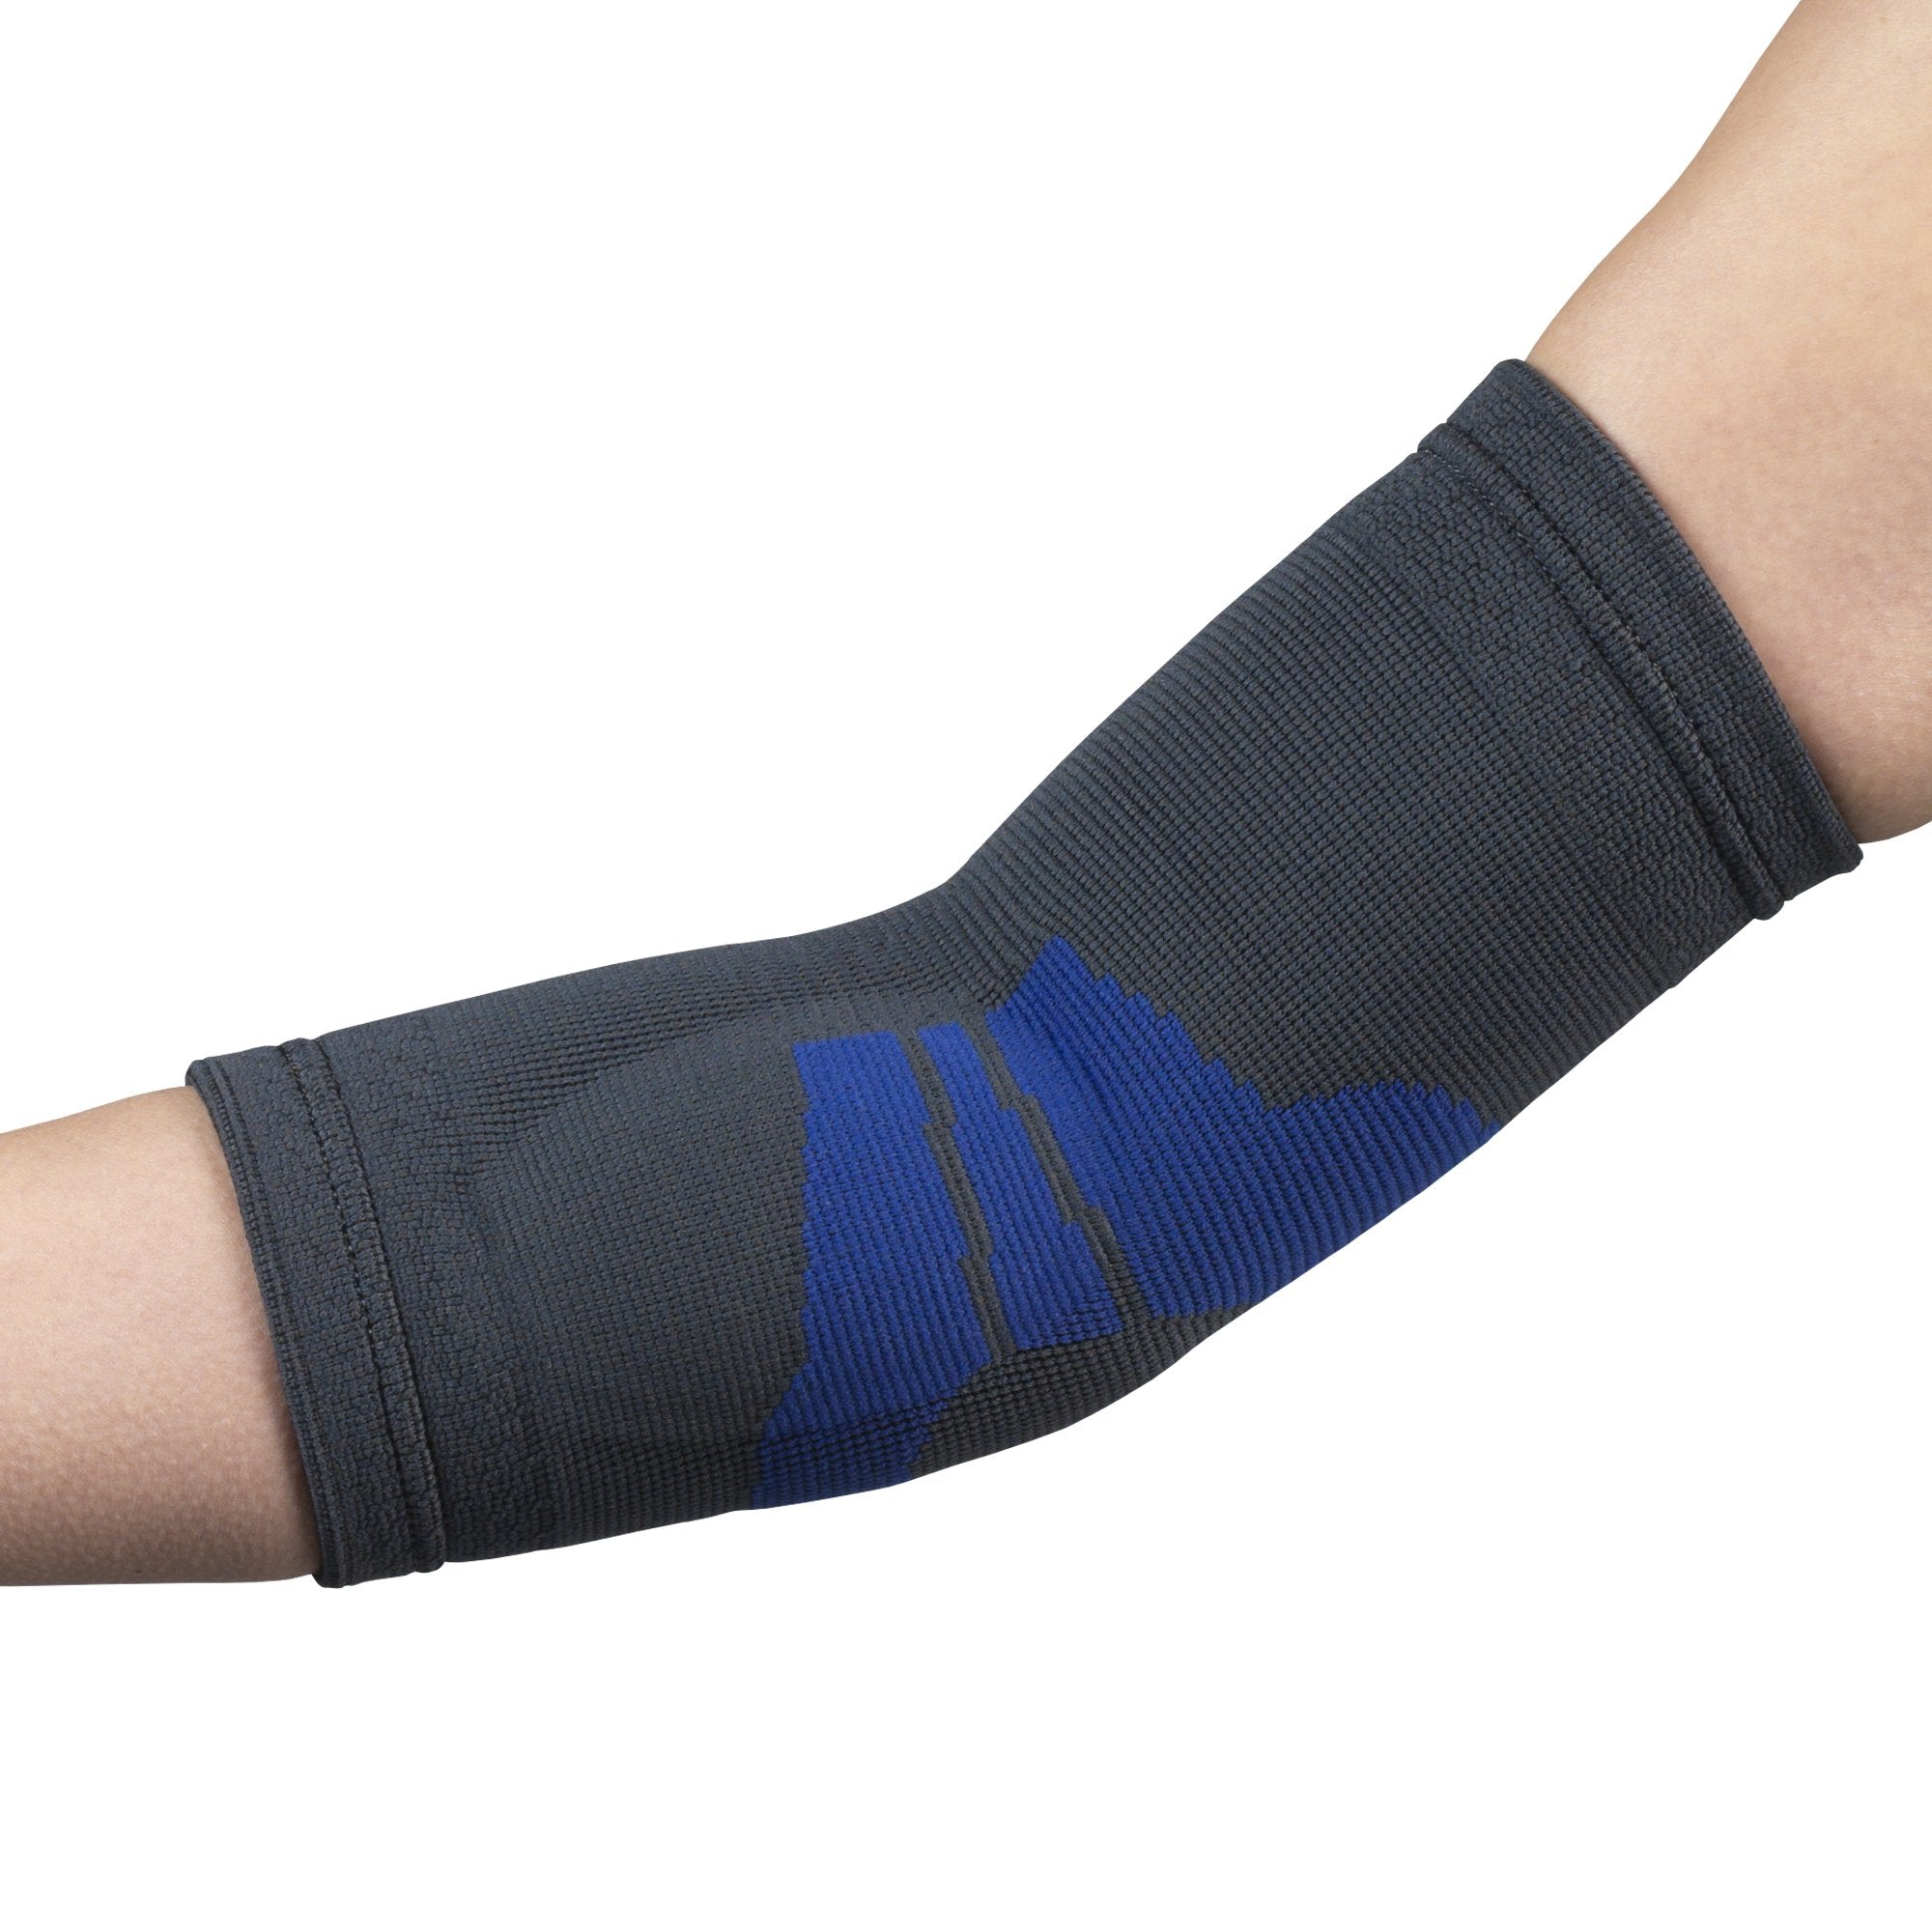 Ea/1 Otc Elastic Elbow Support With Gel Insert Small (9 - 10 1/4